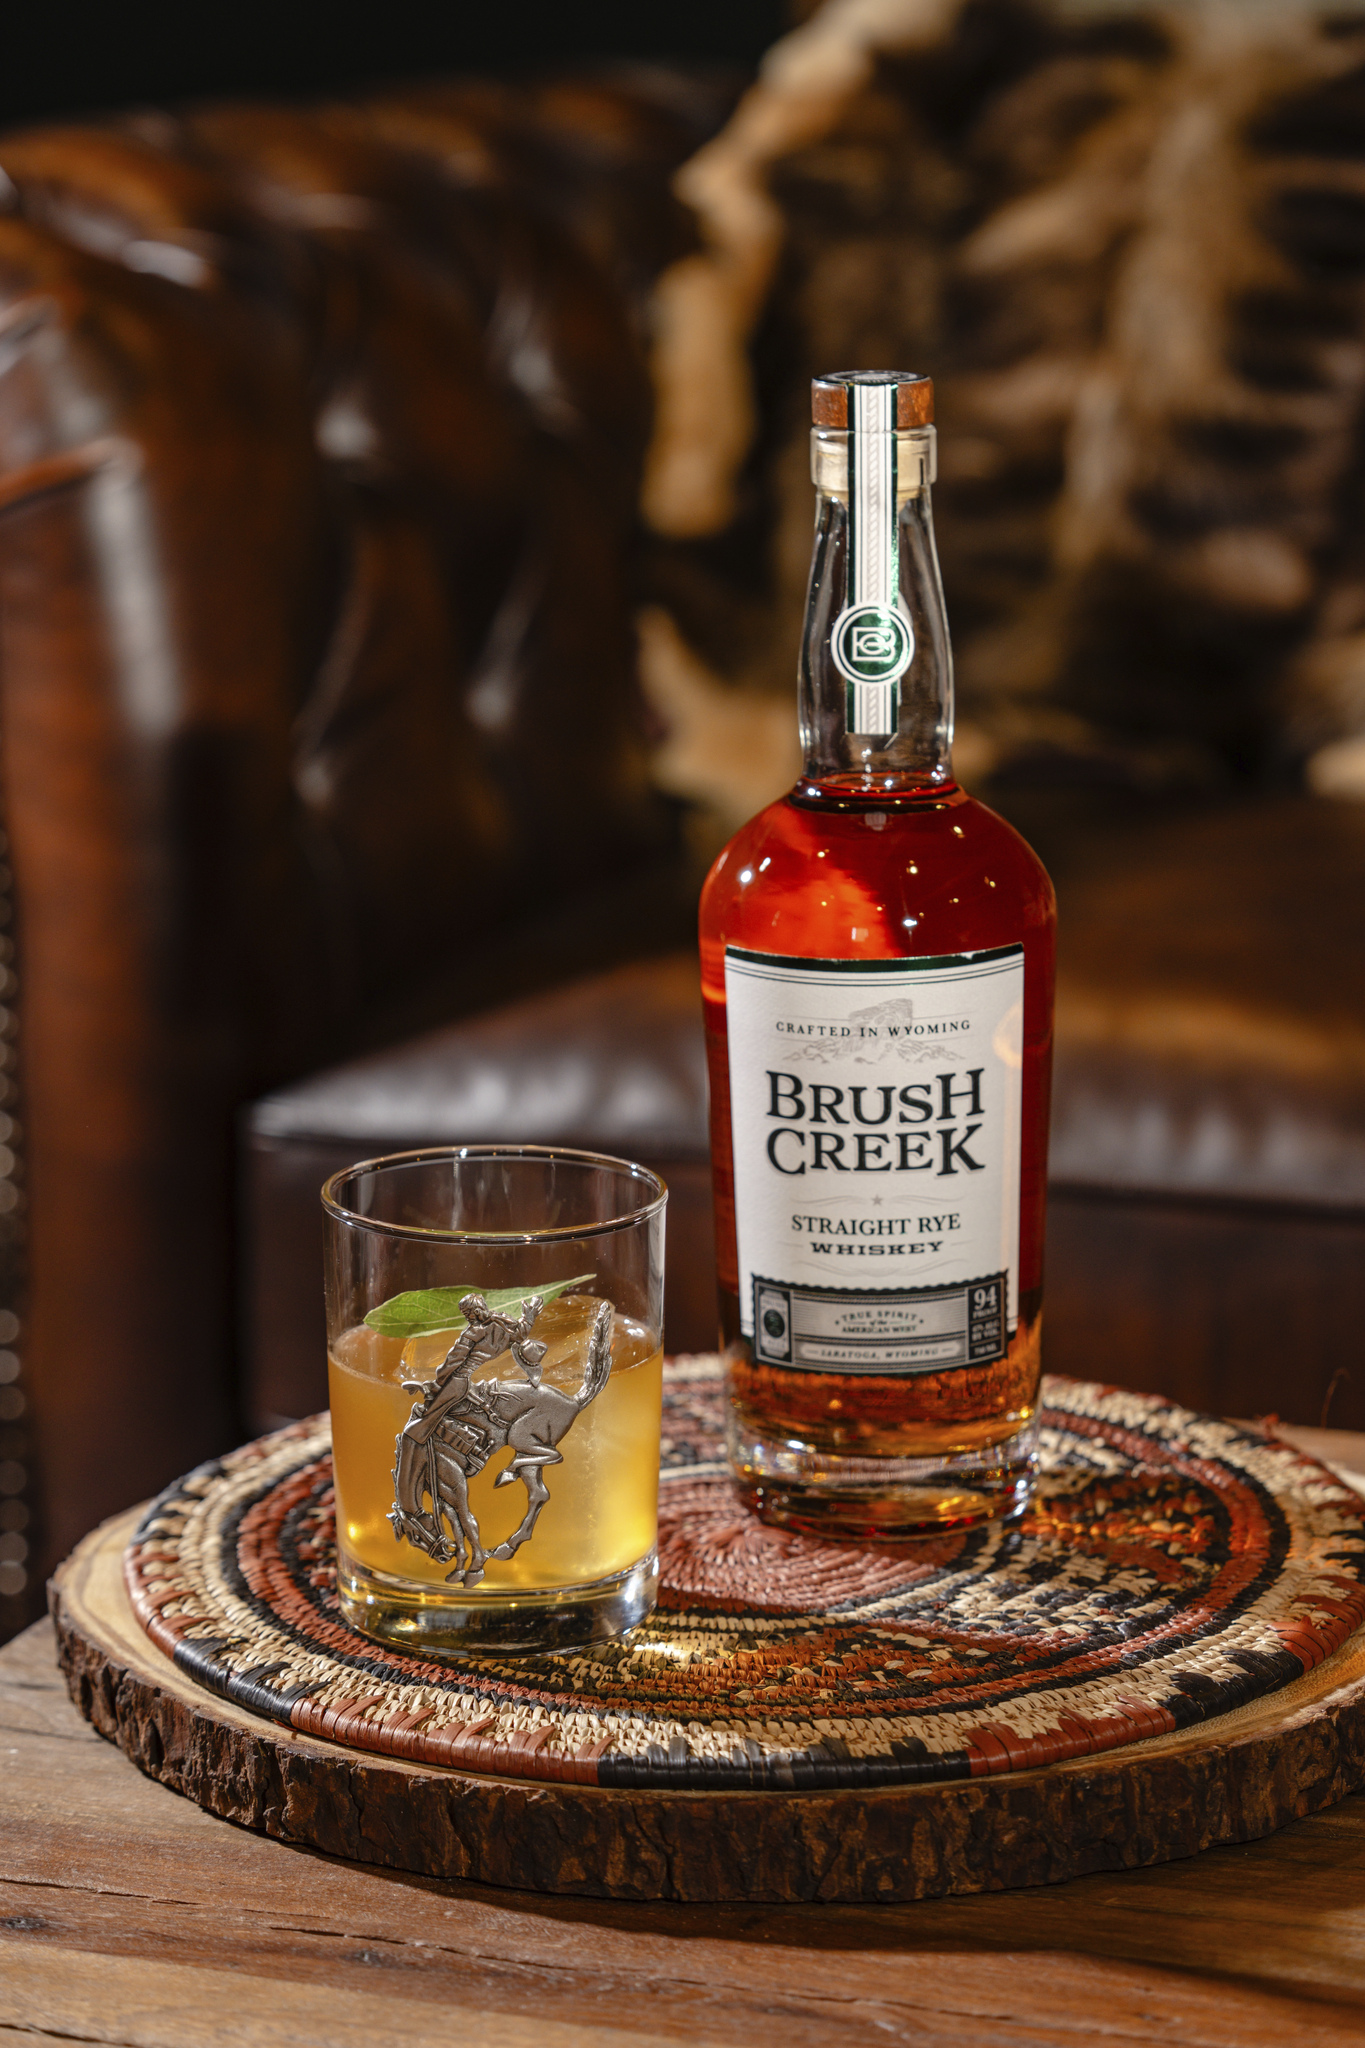 Brush Creek Ranch Offers An Amazing Whiskey Opportunity